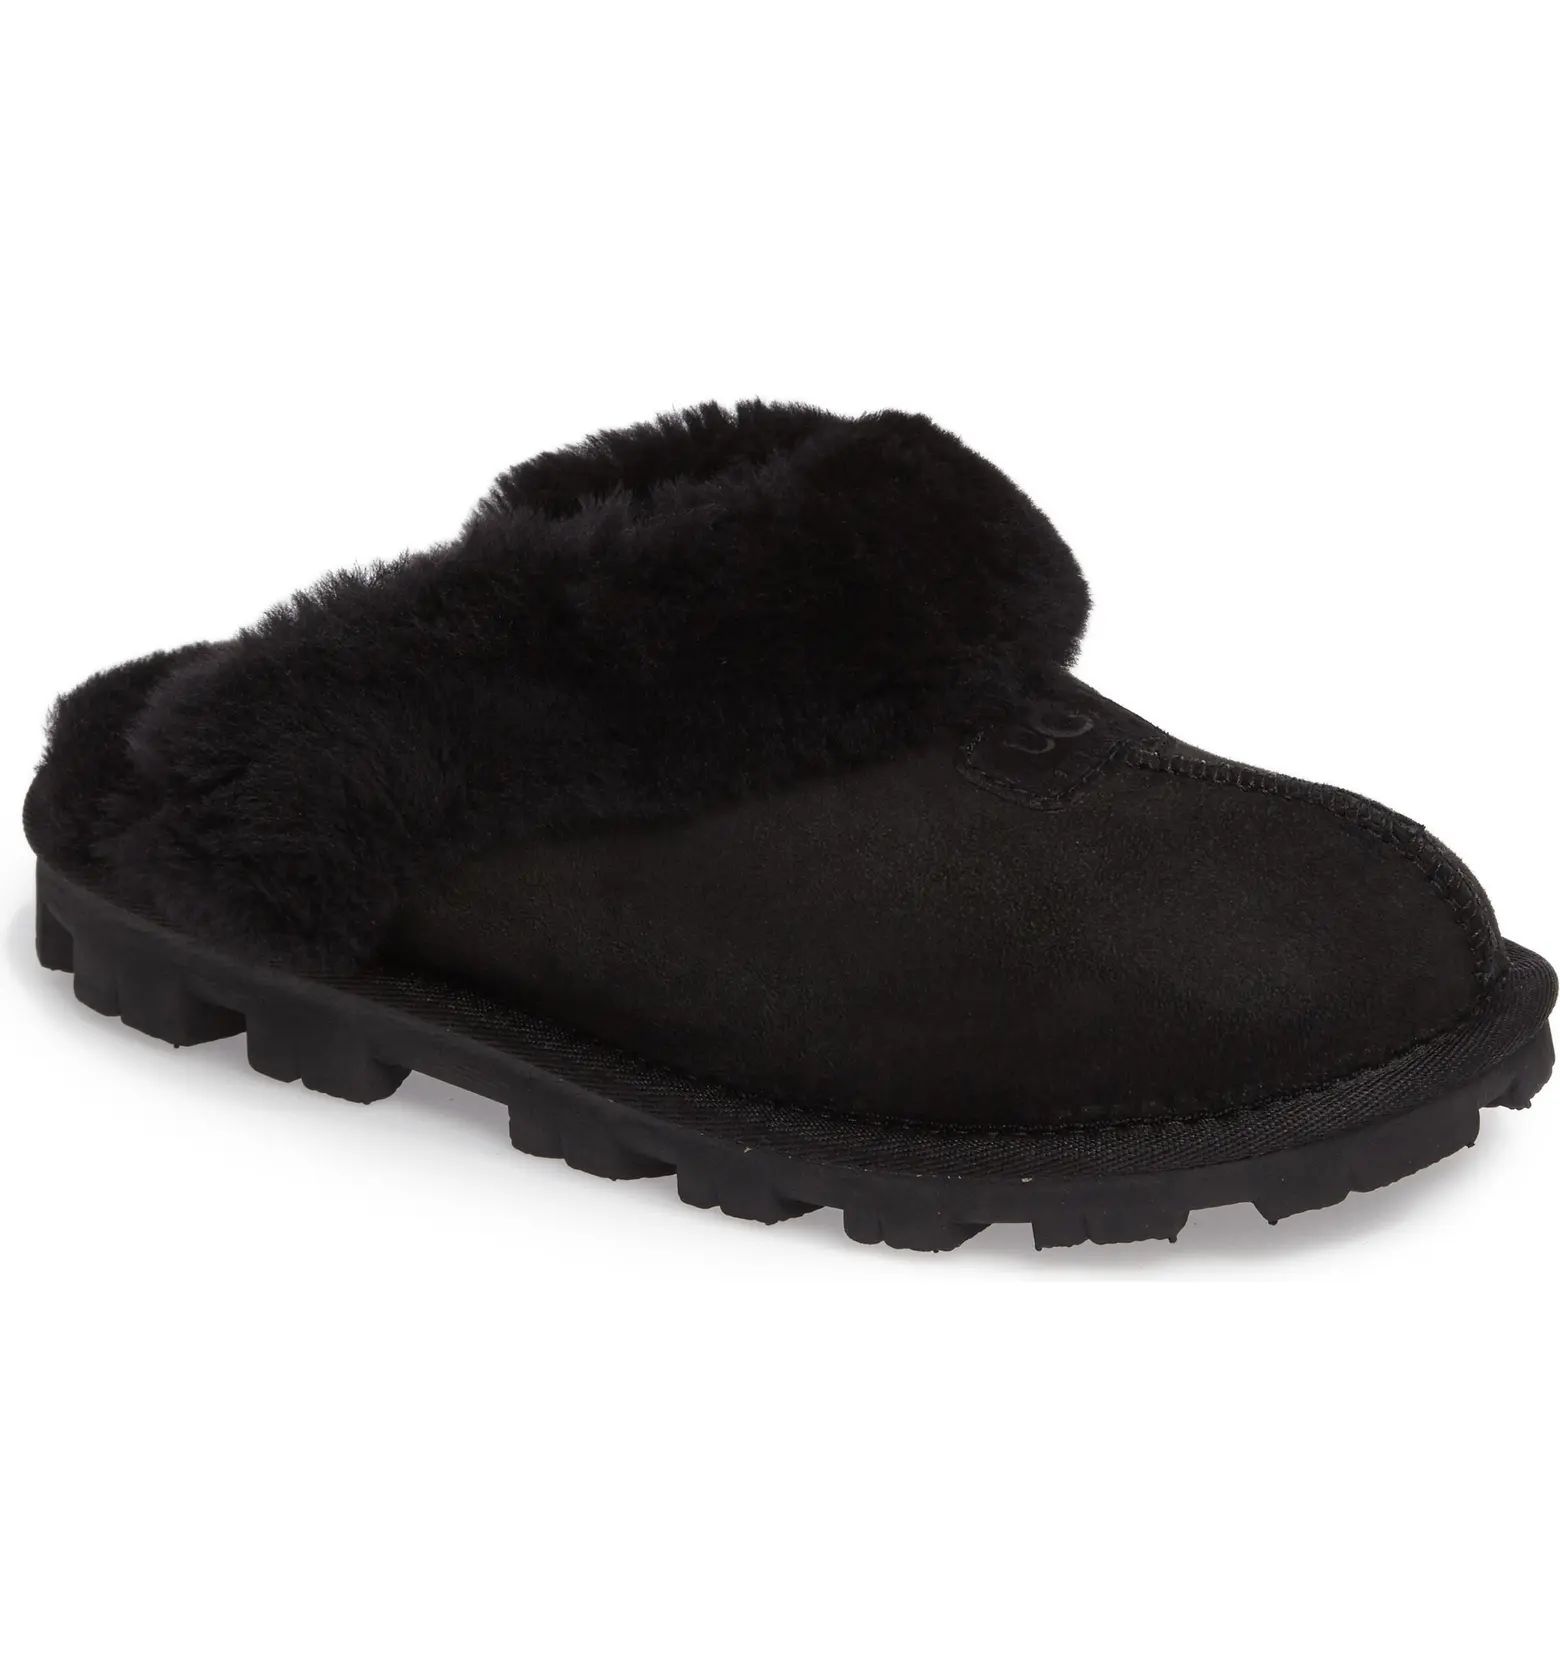 Coquette Shearling Lined Slipper | Nordstrom